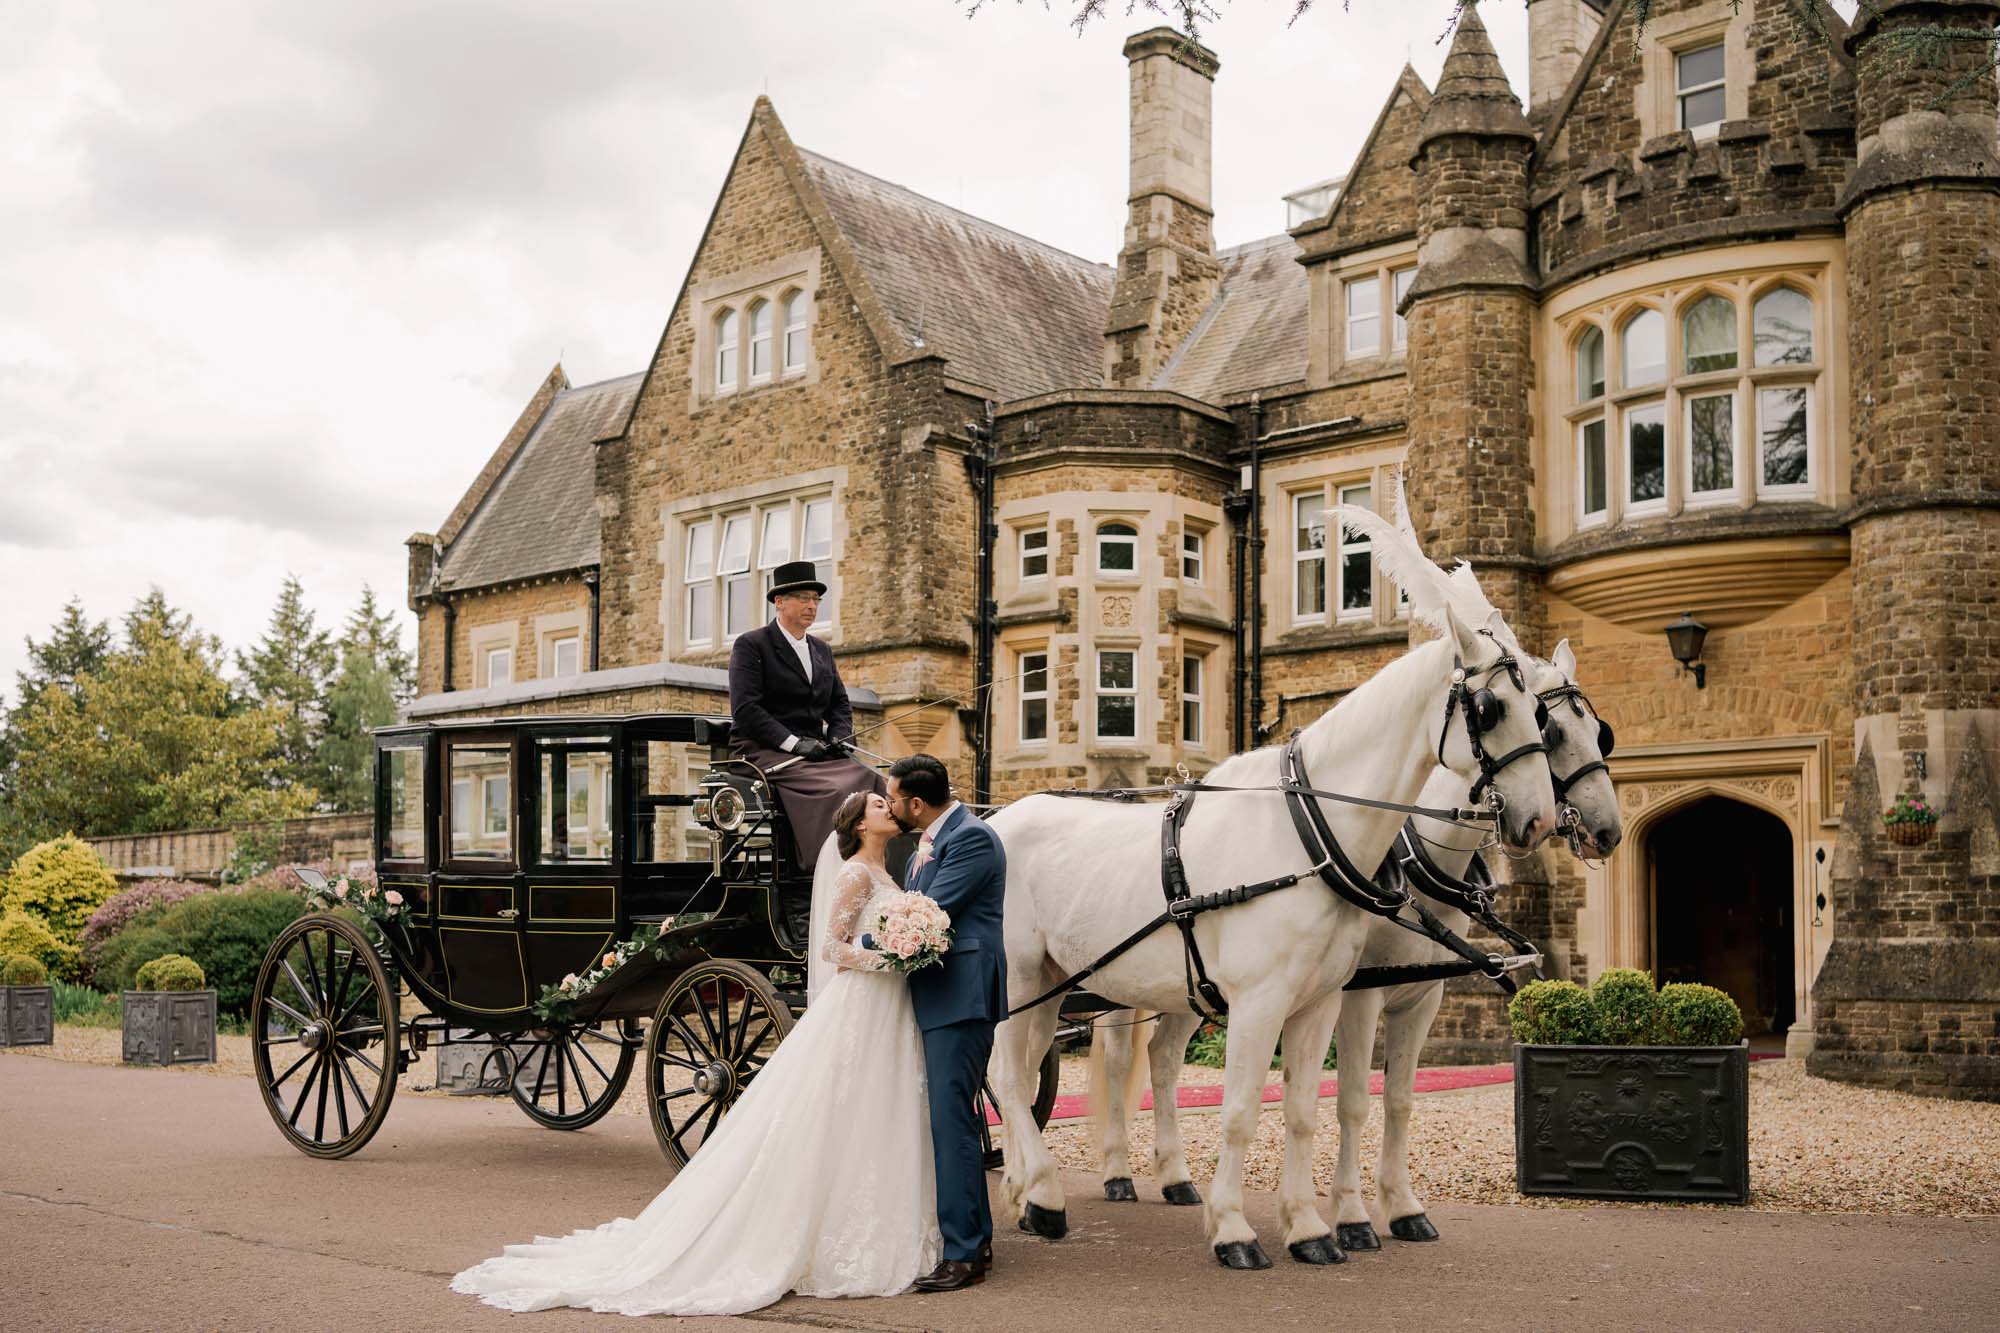 Bride and groom kiss on their wedding day in front of a horse and cart at Hartsfield Manor.